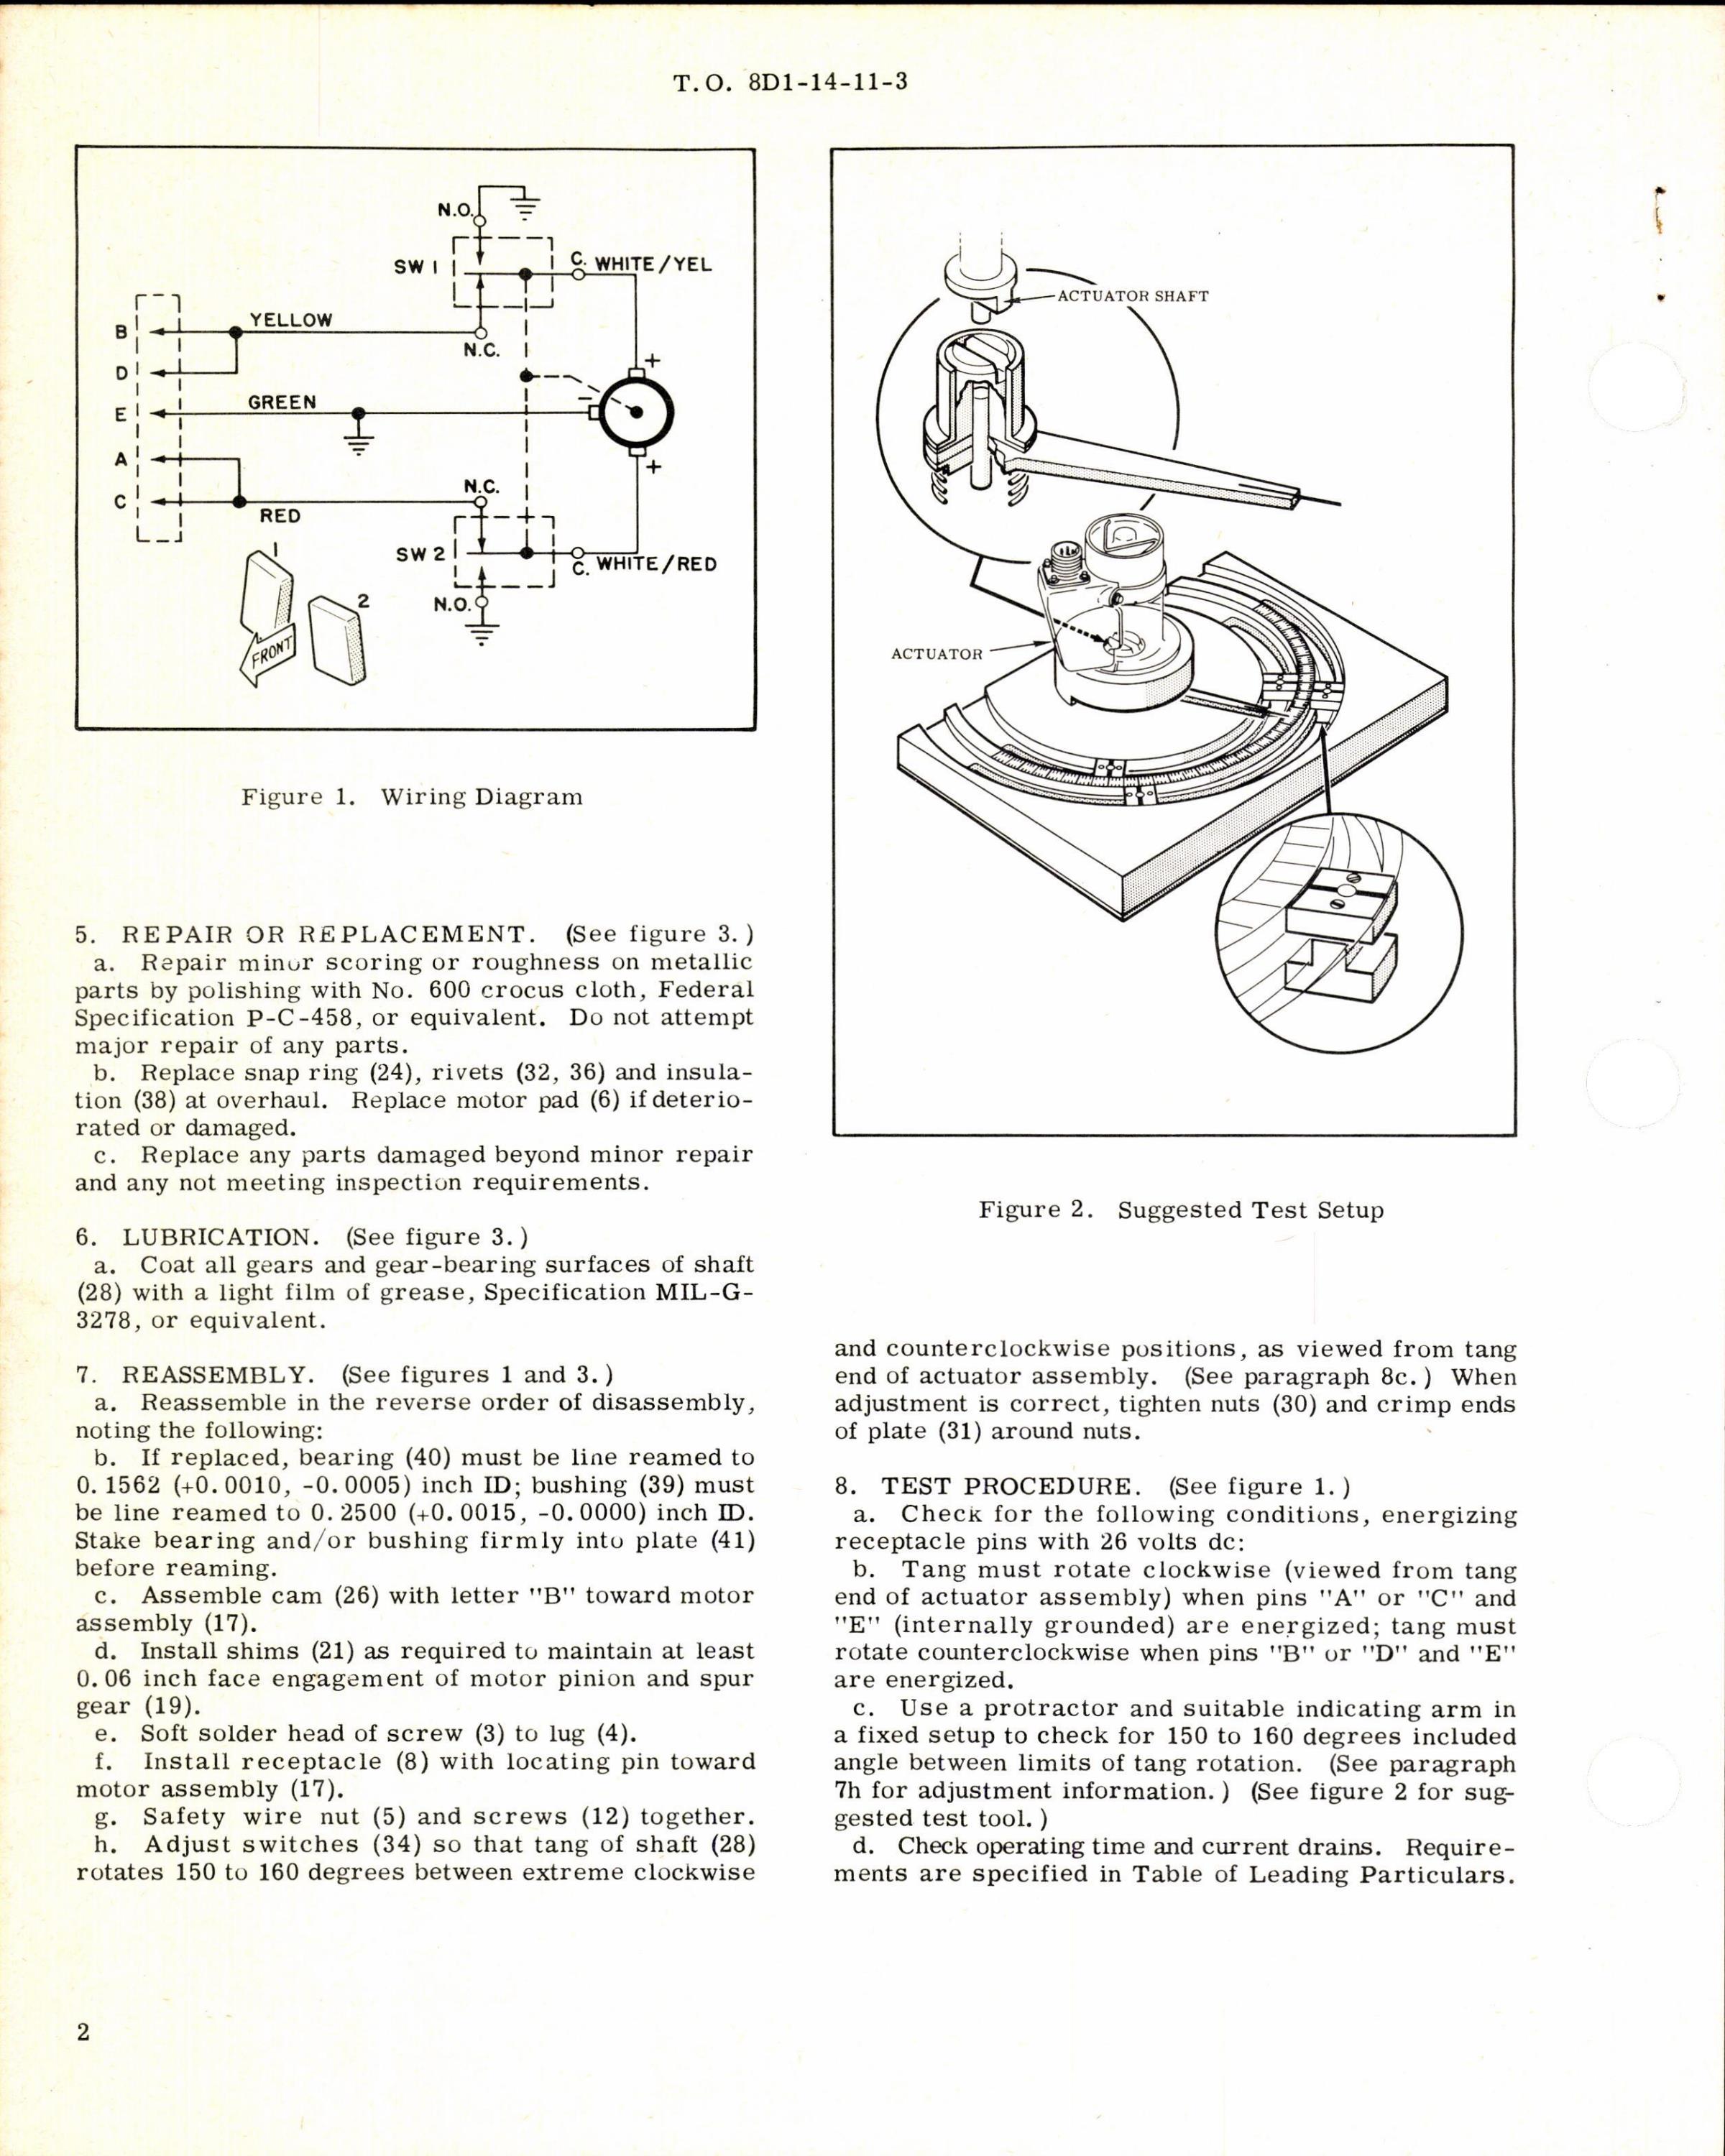 Sample page 2 from AirCorps Library document: Instructions w Parts Breakdown for Actuator Assembly Part WA8005